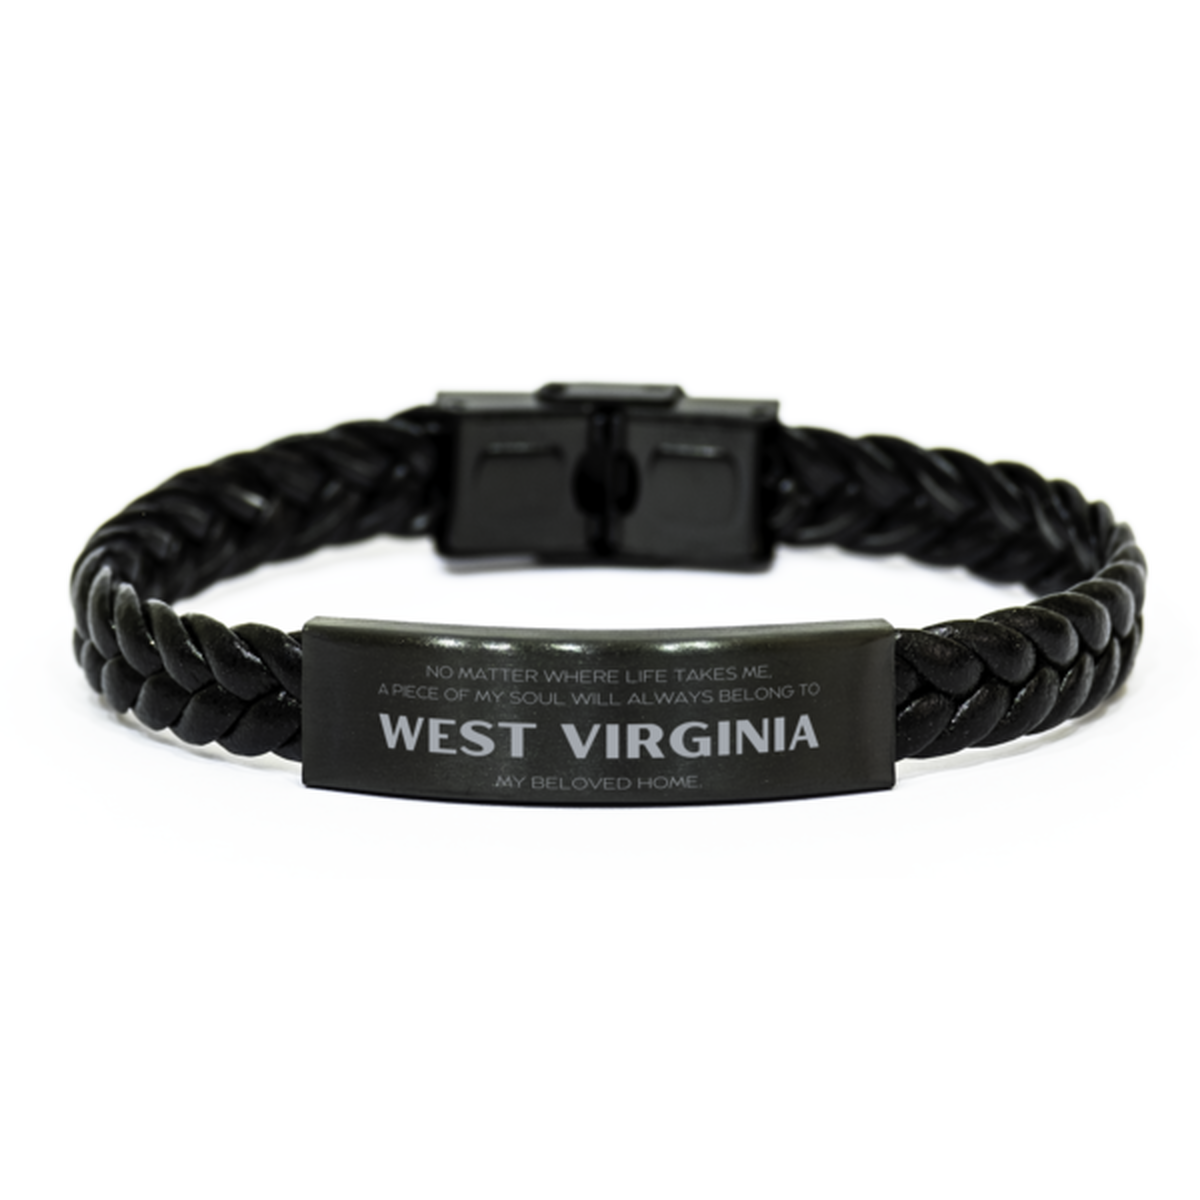 Love West Virginia State Gifts, My soul will always belong to West Virginia, Proud Braided Leather Bracelet, Birthday Unique Gifts For West Virginia Men, Women, Friends